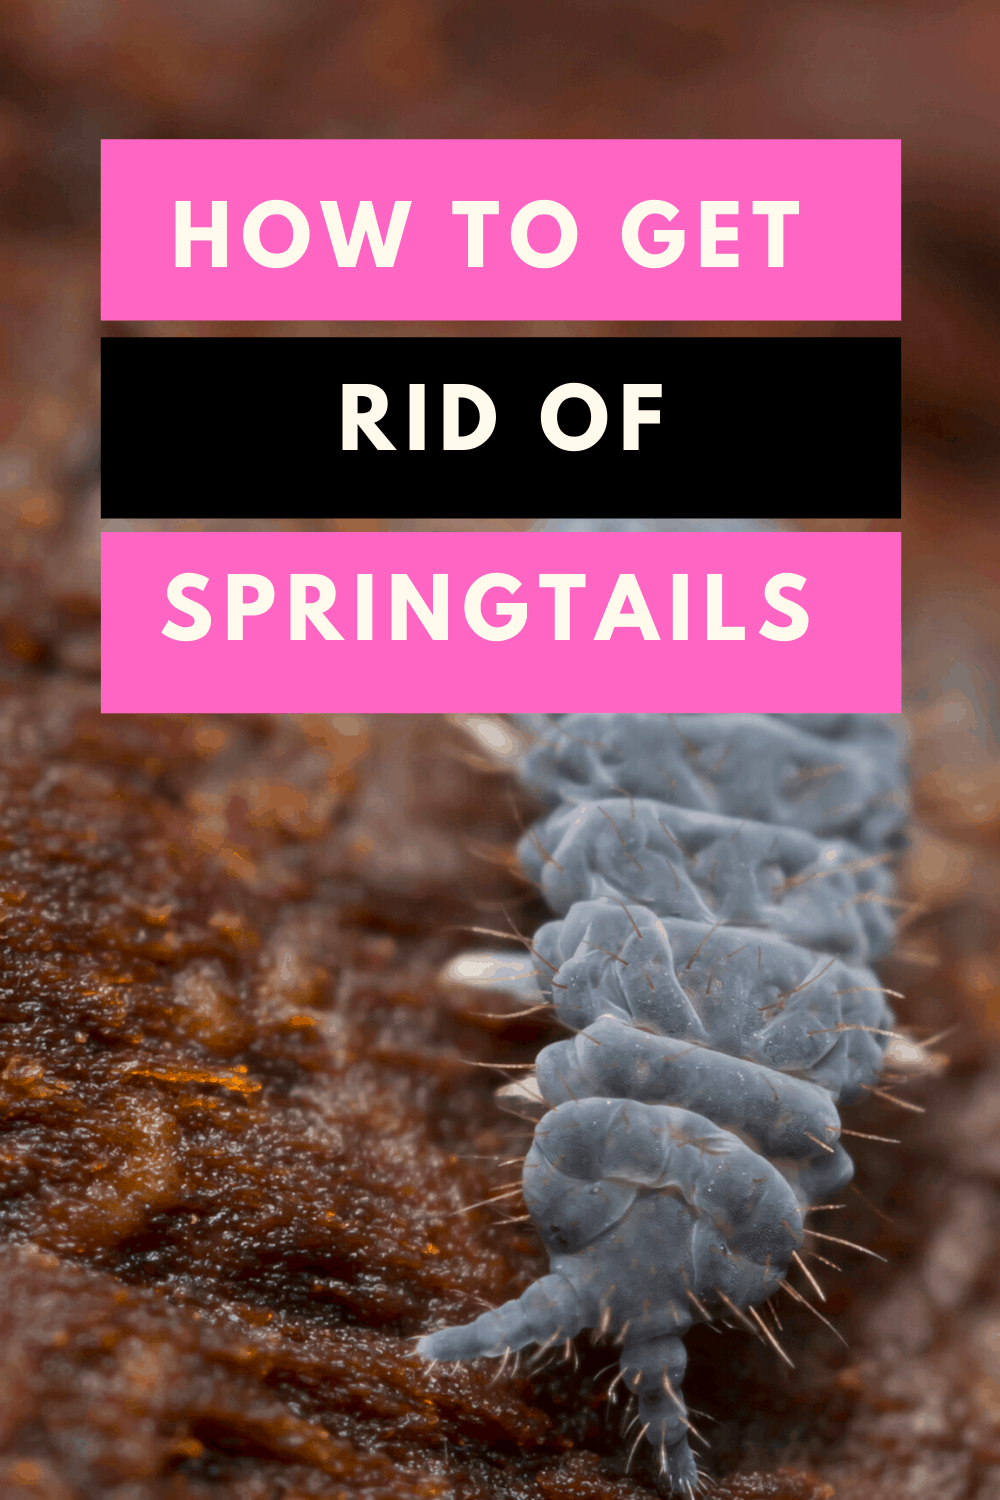 How to get rid of Springtails